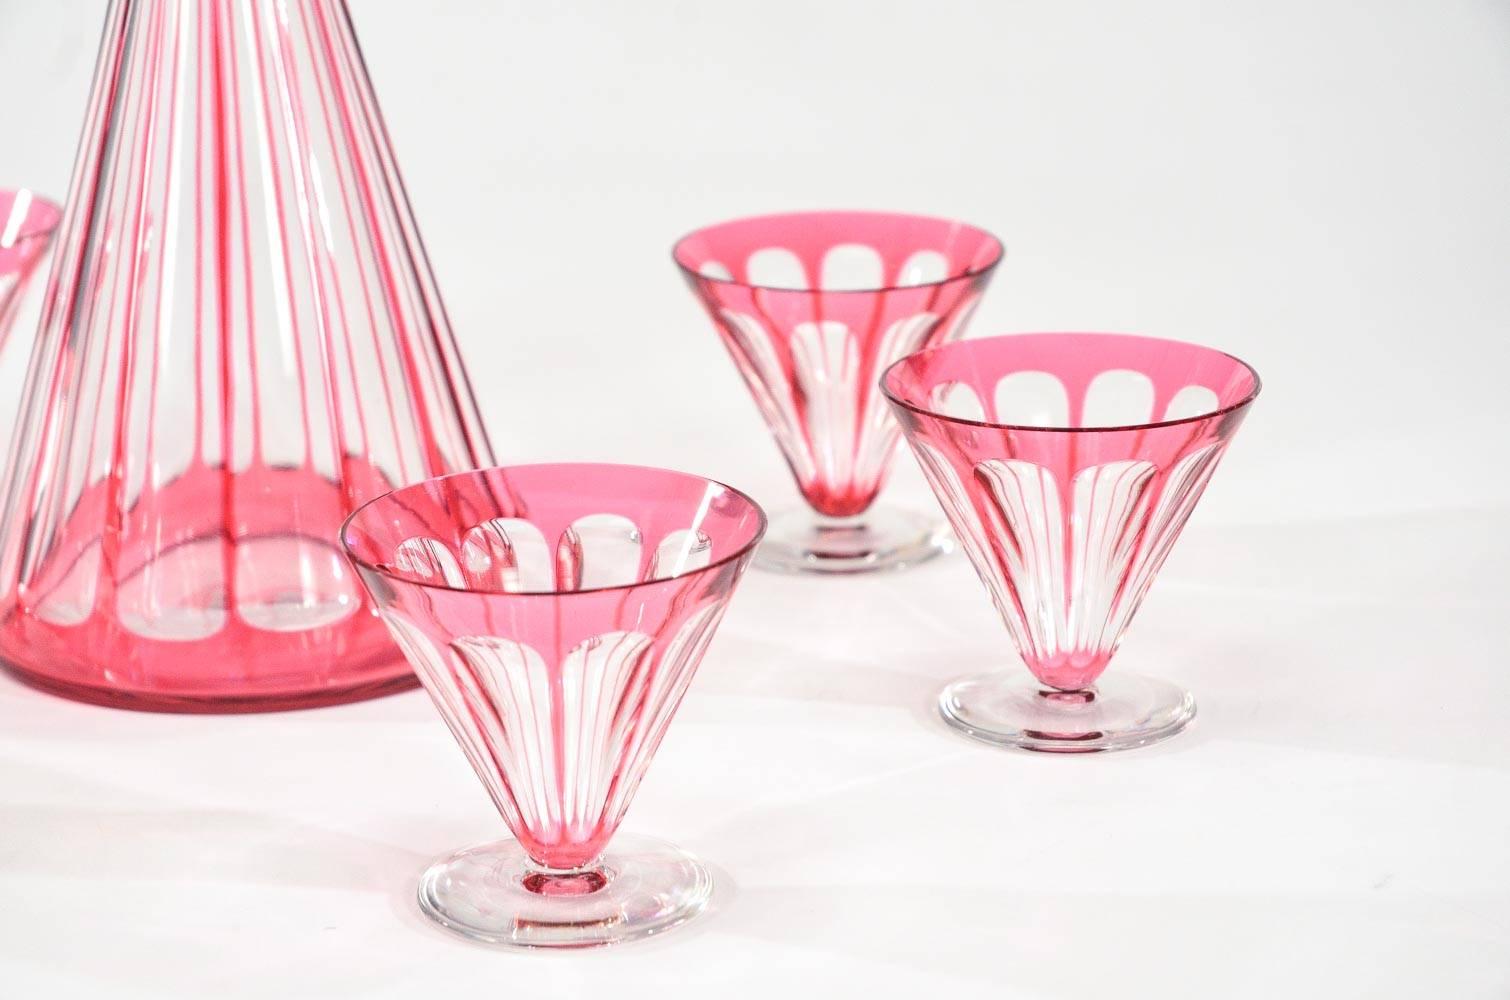 This Val Saint Lambert Art Deco cocktail set includes the decanter and 6 matching V-shaped glasses, making it a Classic combination for both a back bar or filled with your favorite cocktail. The cranberry overlay is cut to clear in a perfect ray-cut